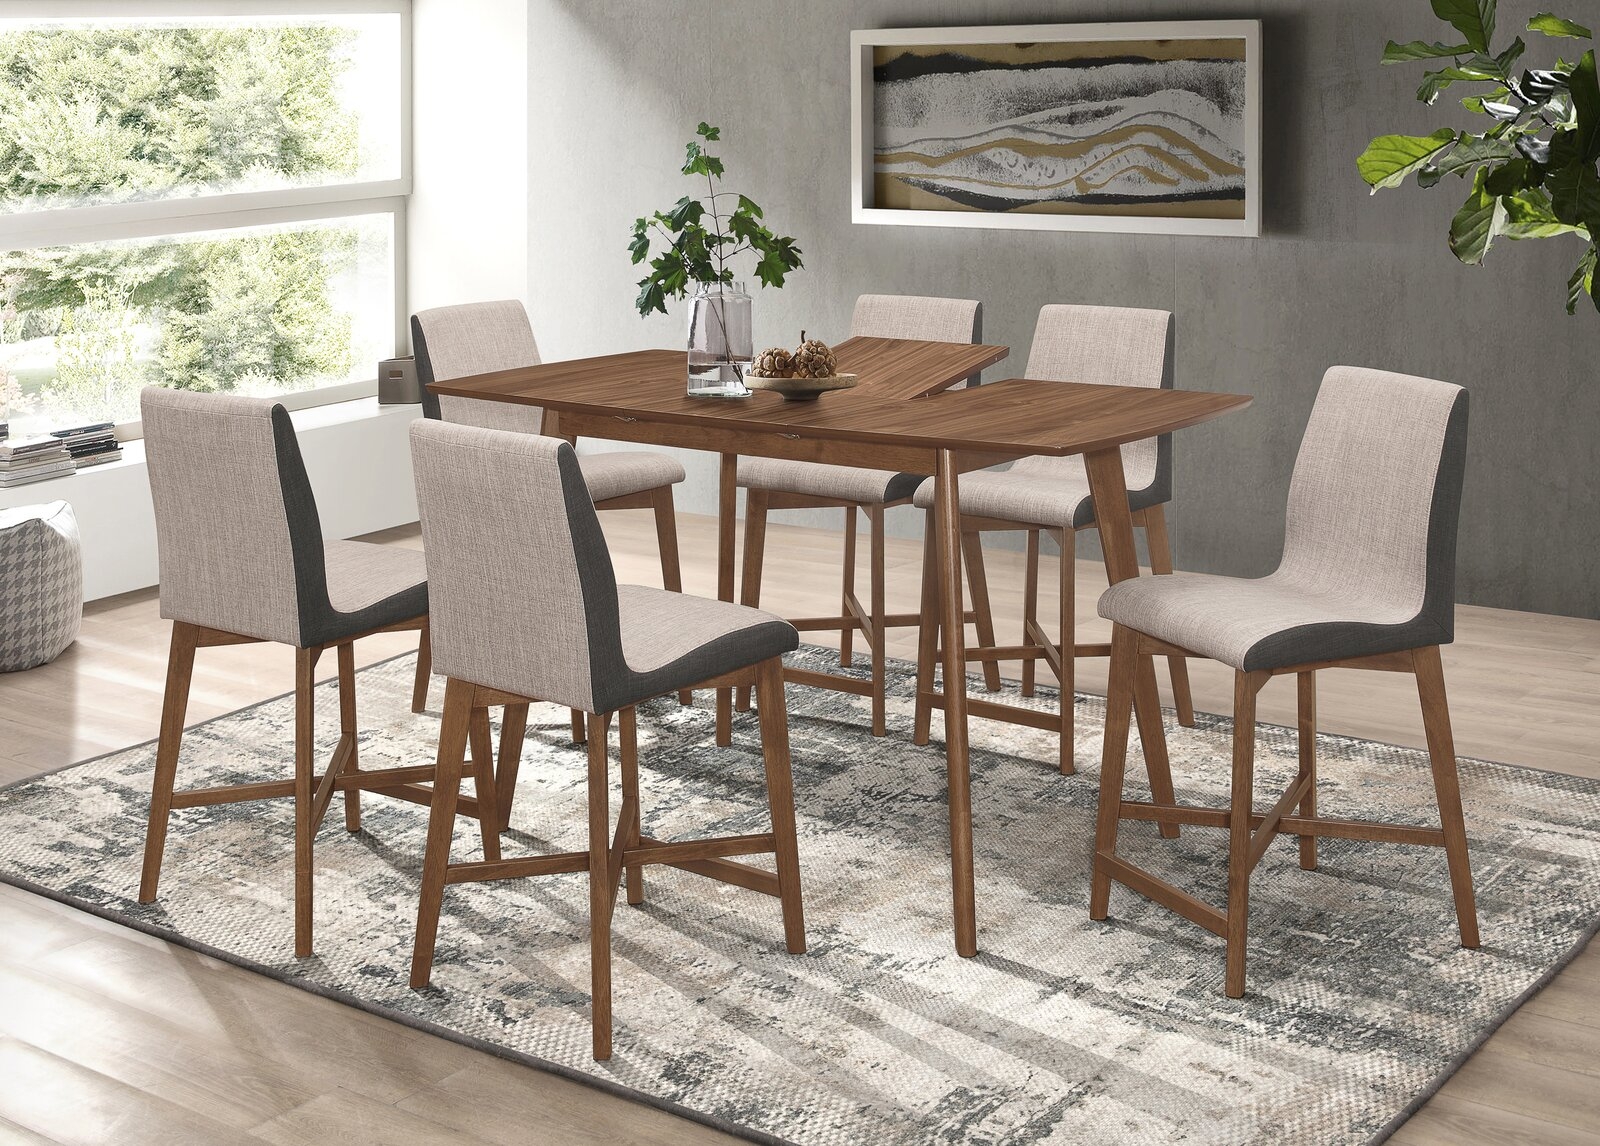 Annemore Counter Height Butterfly Leaf Dining Table - Image 1